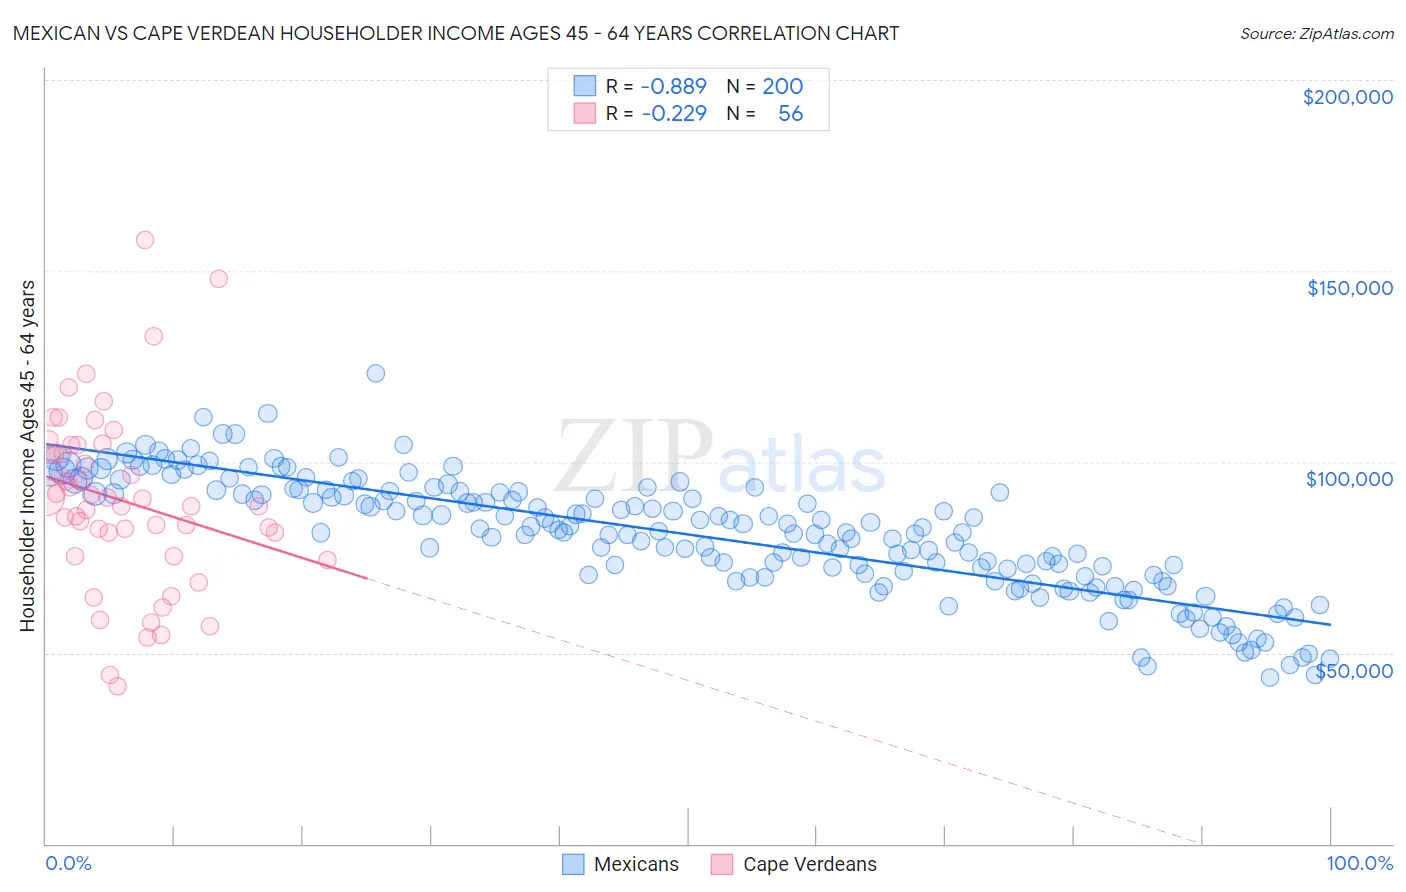 Mexican vs Cape Verdean Householder Income Ages 45 - 64 years